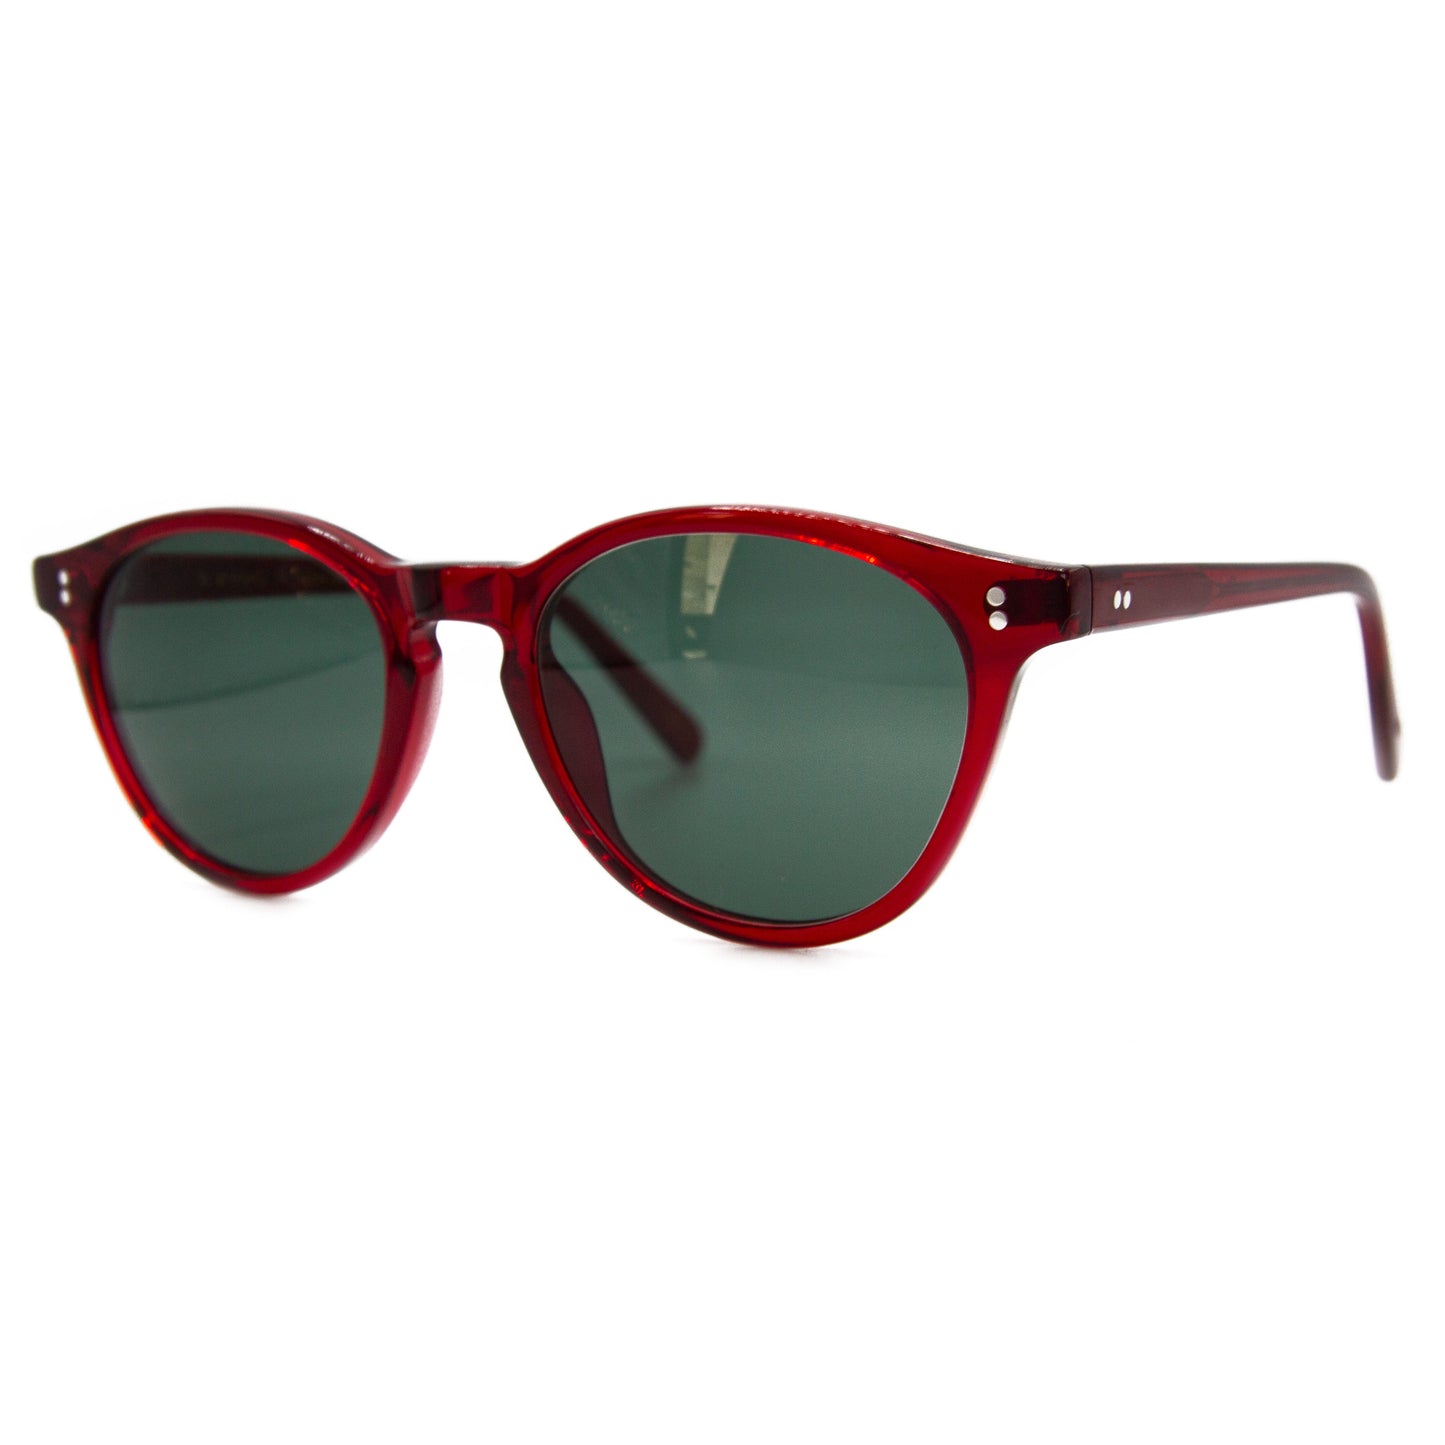 3 brothers - Chantal - Red - Prescription Sunglasses - Side